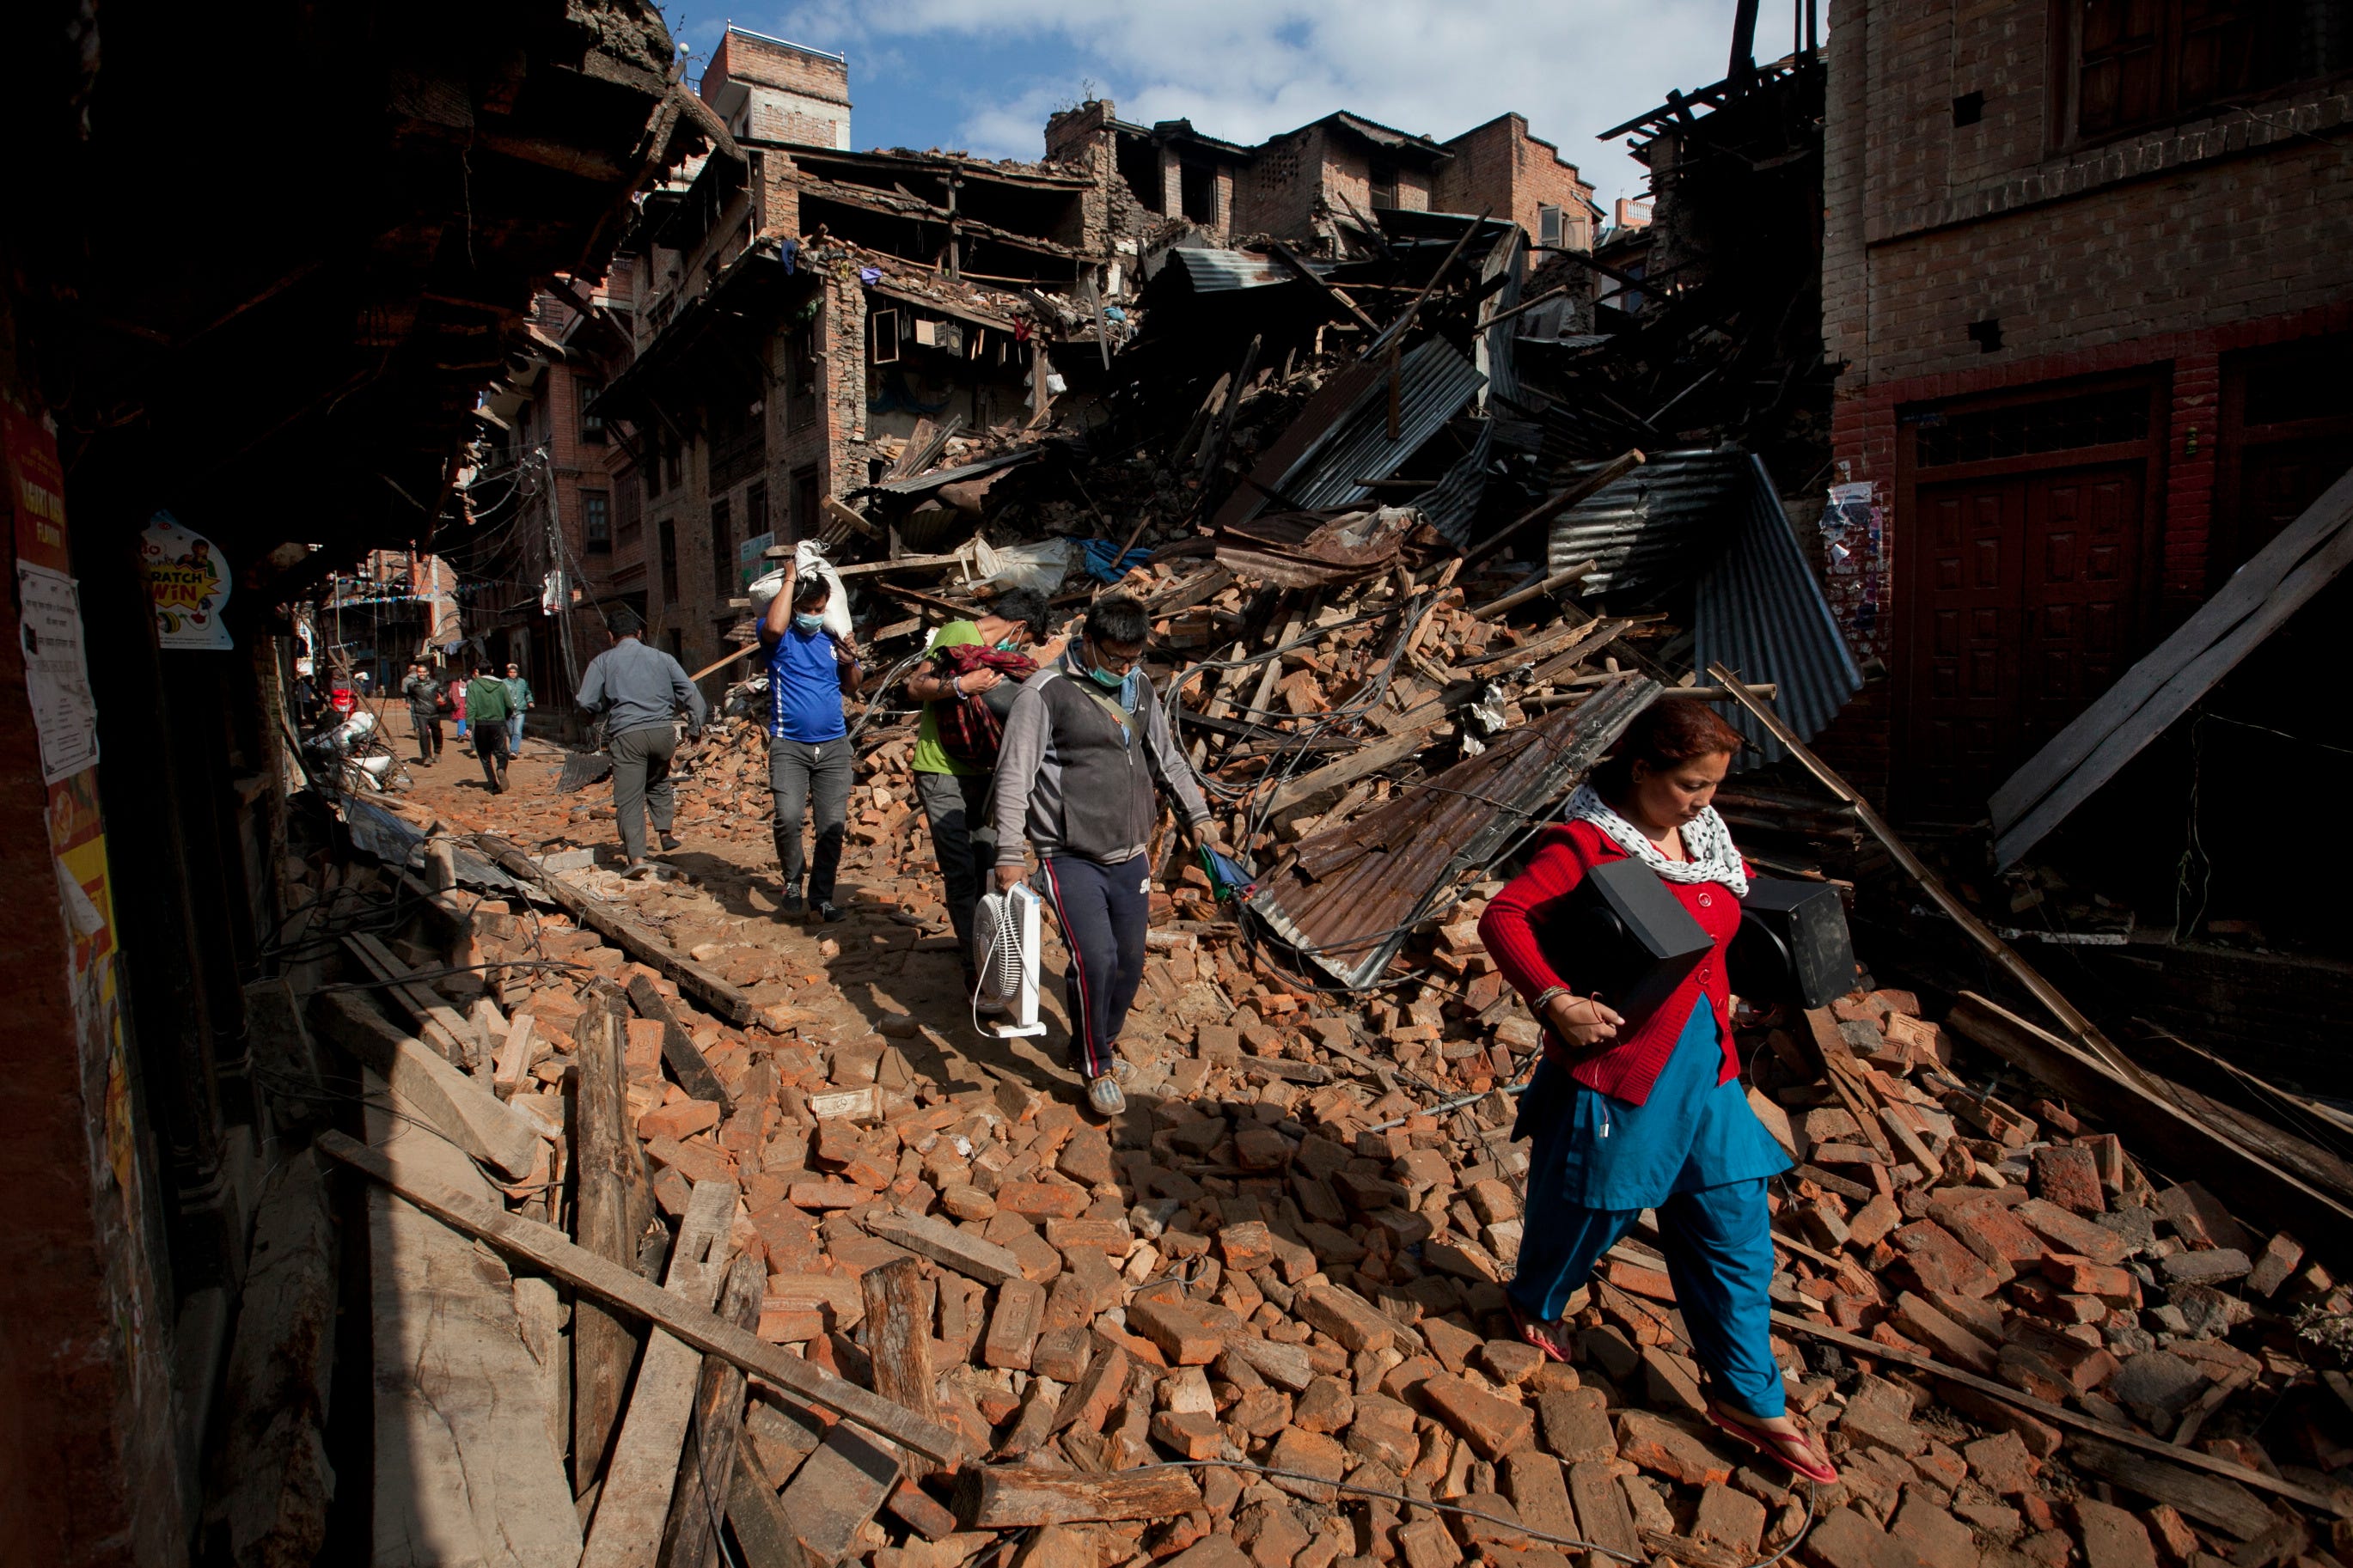 Death toll in Nepal hits 4,000 amid hunt for survivors